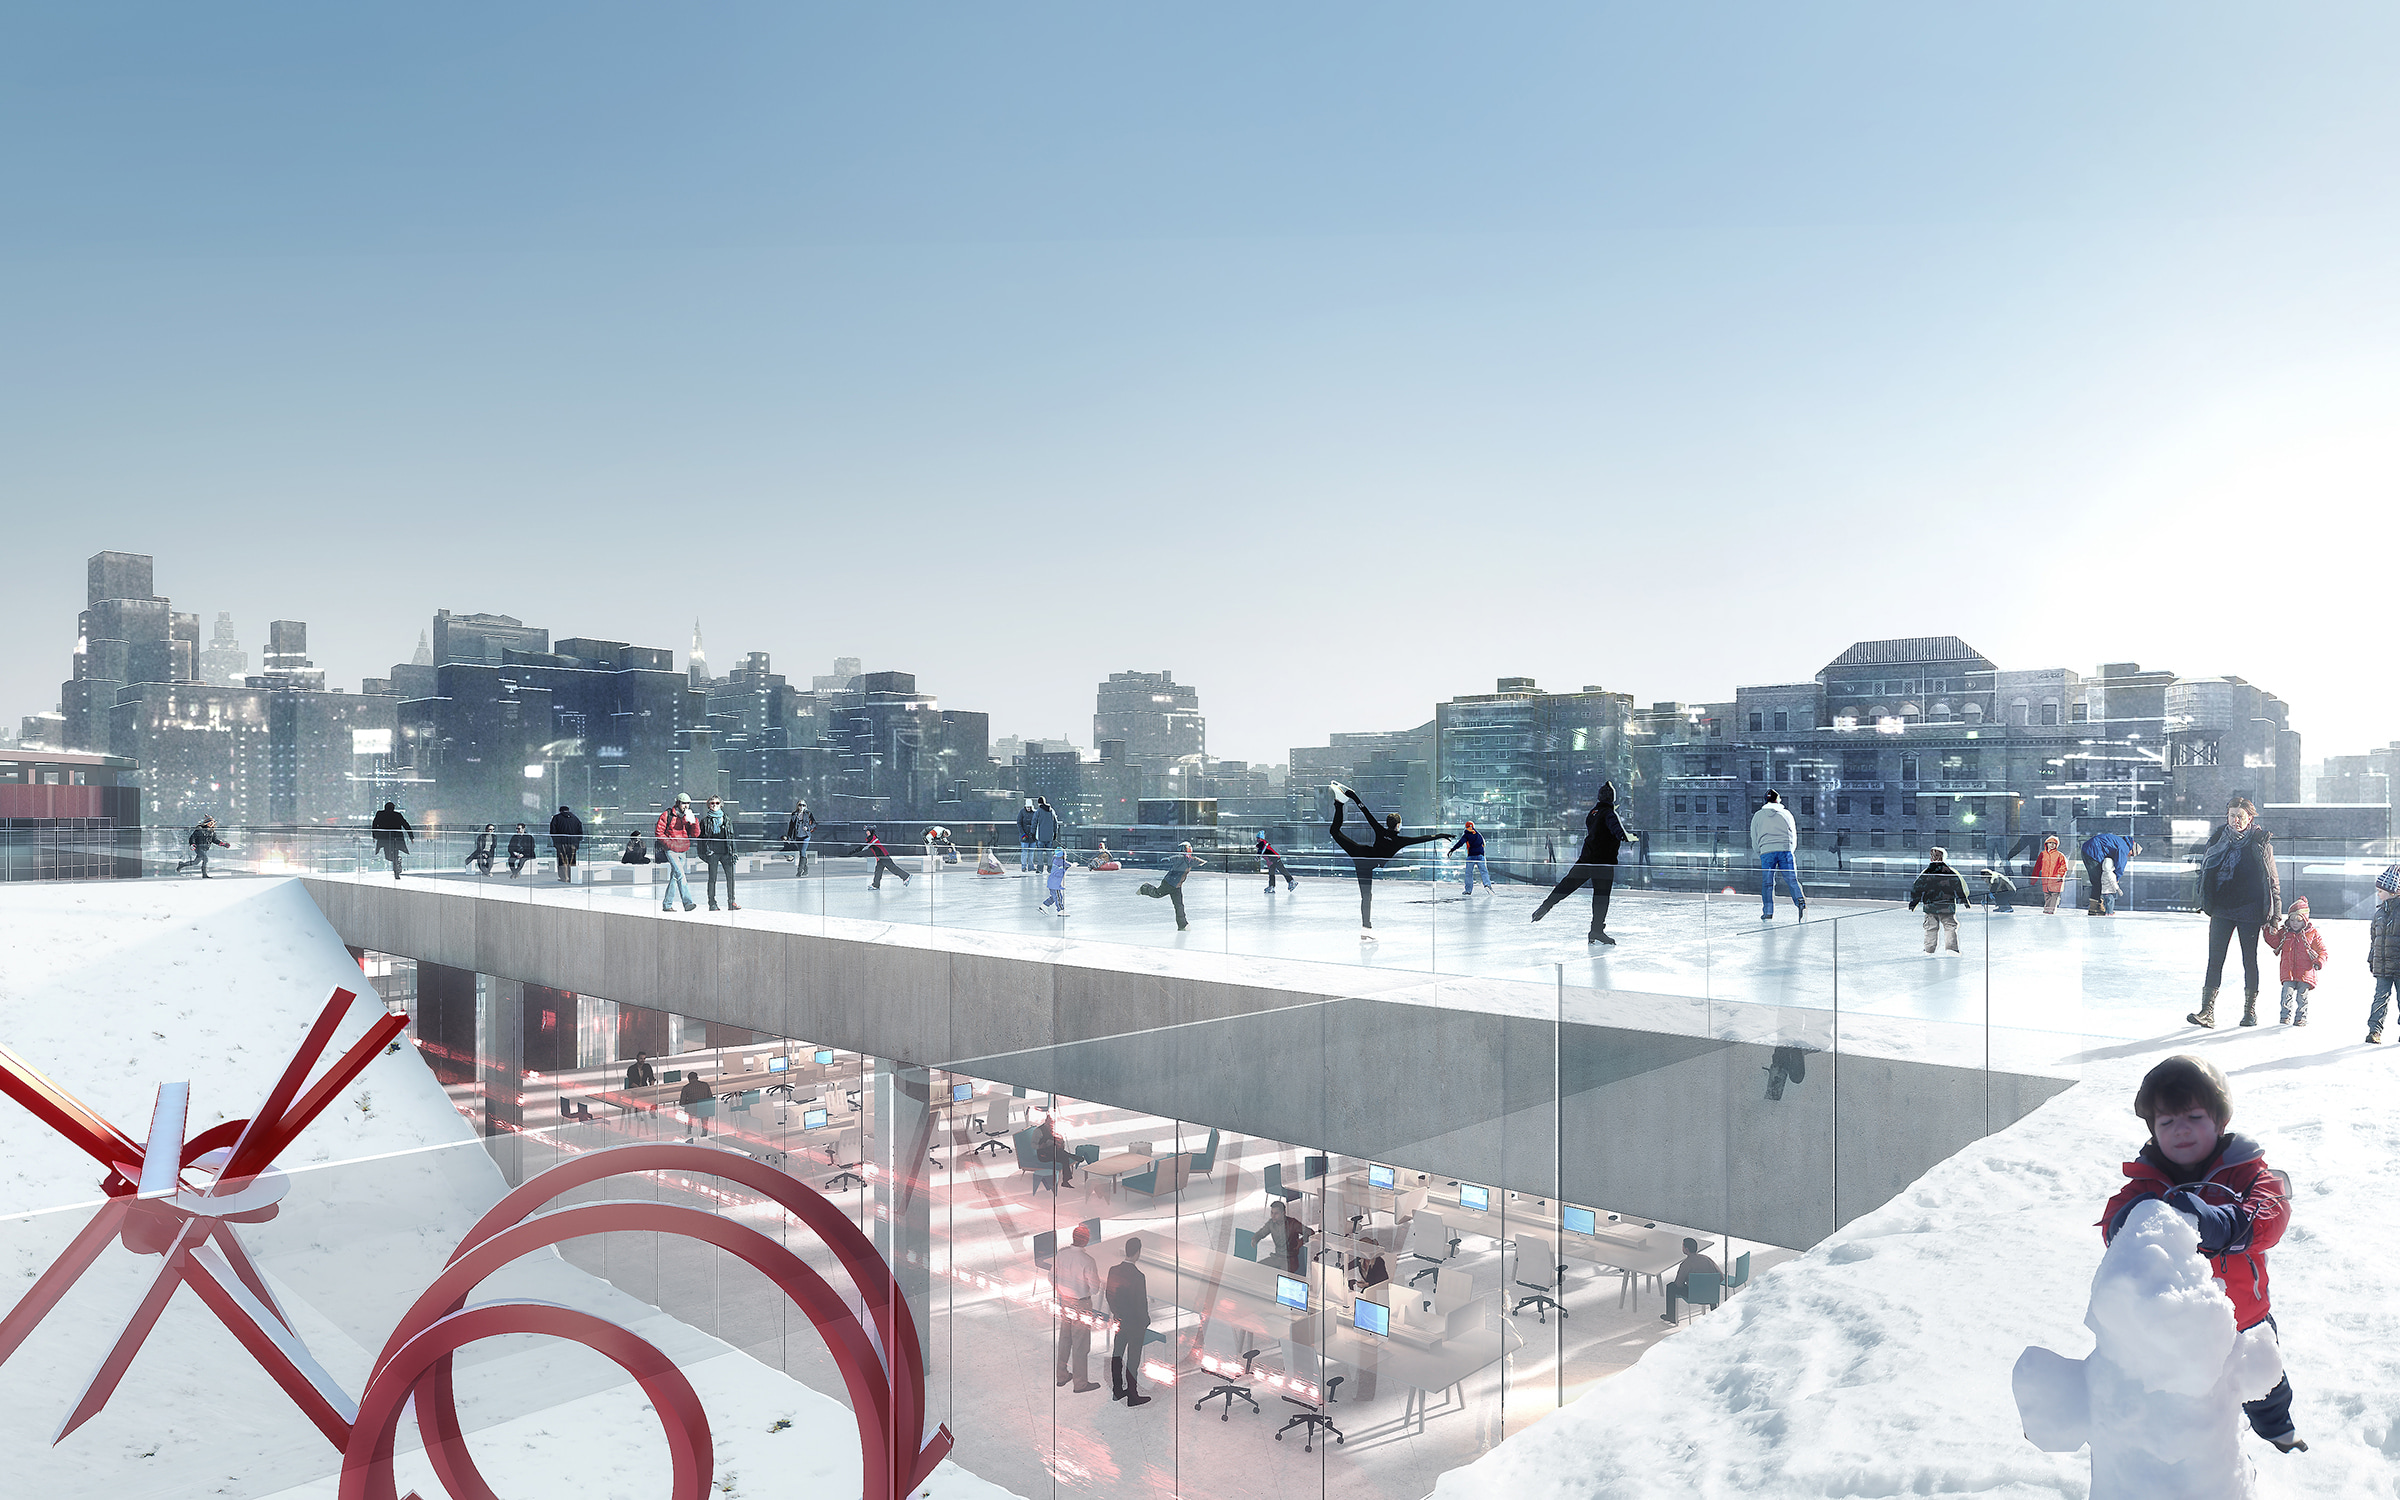 A visualization showing the Farley Annex High Garden ice rink in winter.